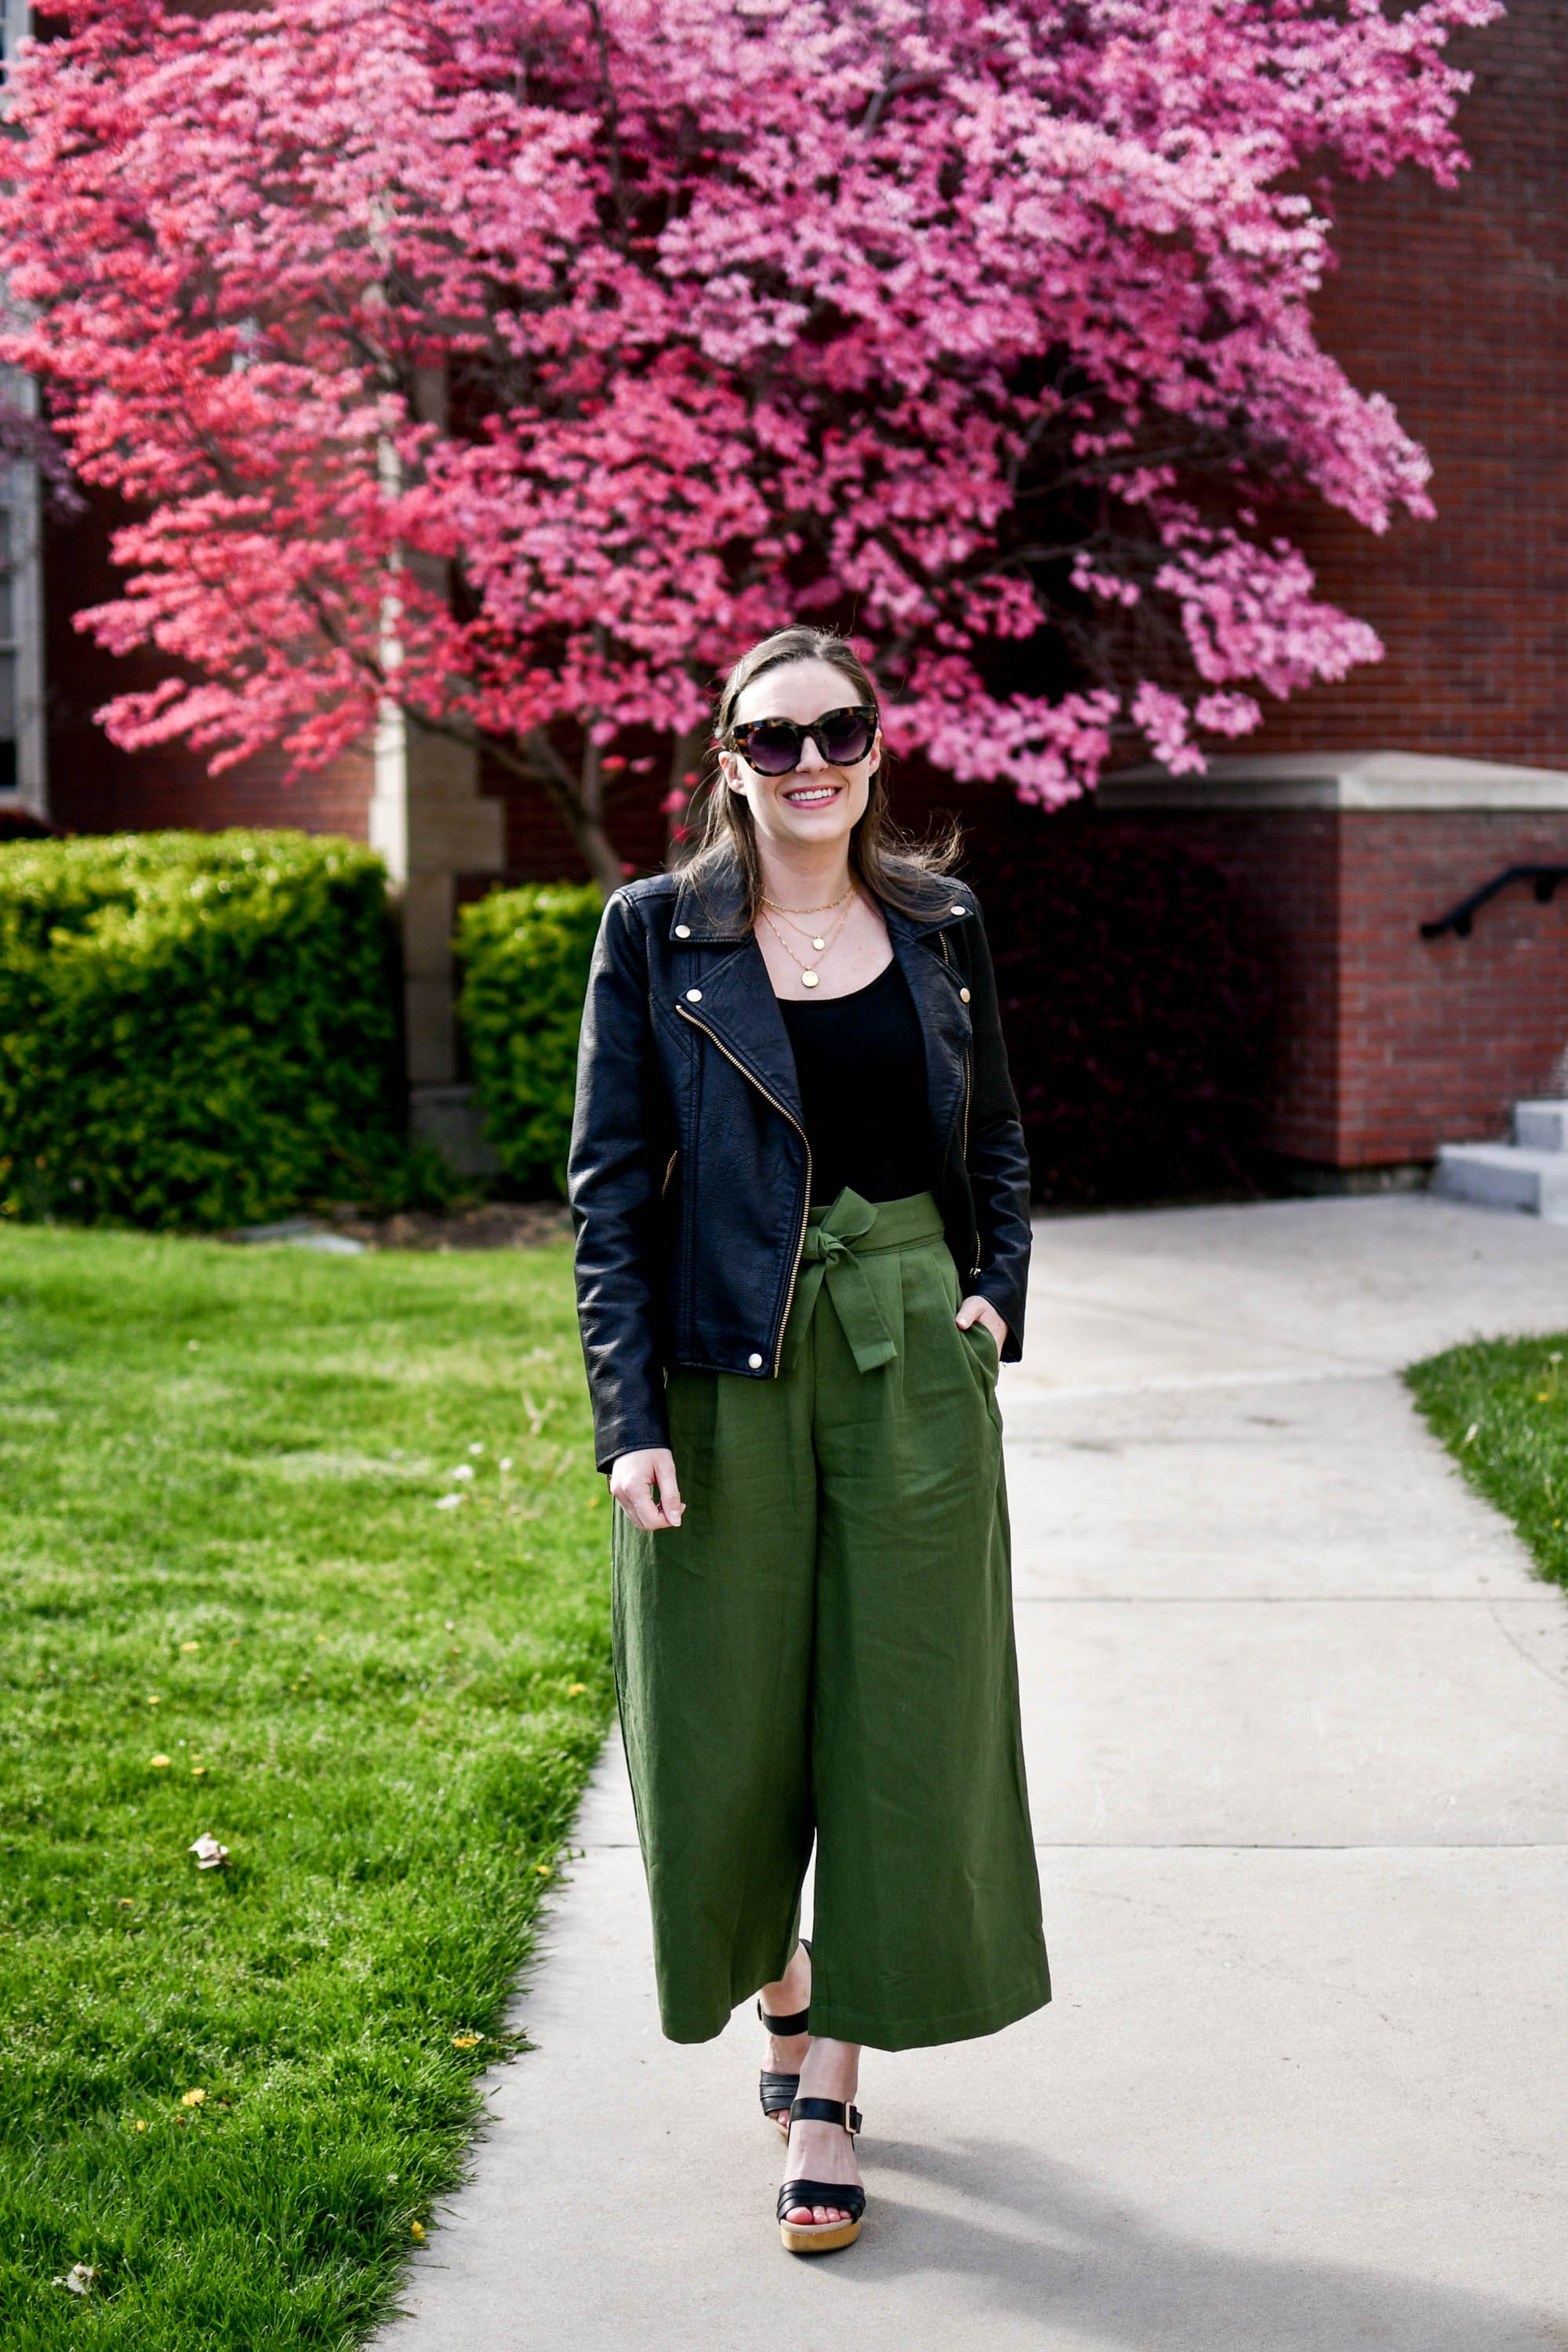 I'm a short girl and there are loads of looks to avoid if you're petite  like me - cropped trousers are a huge no-no